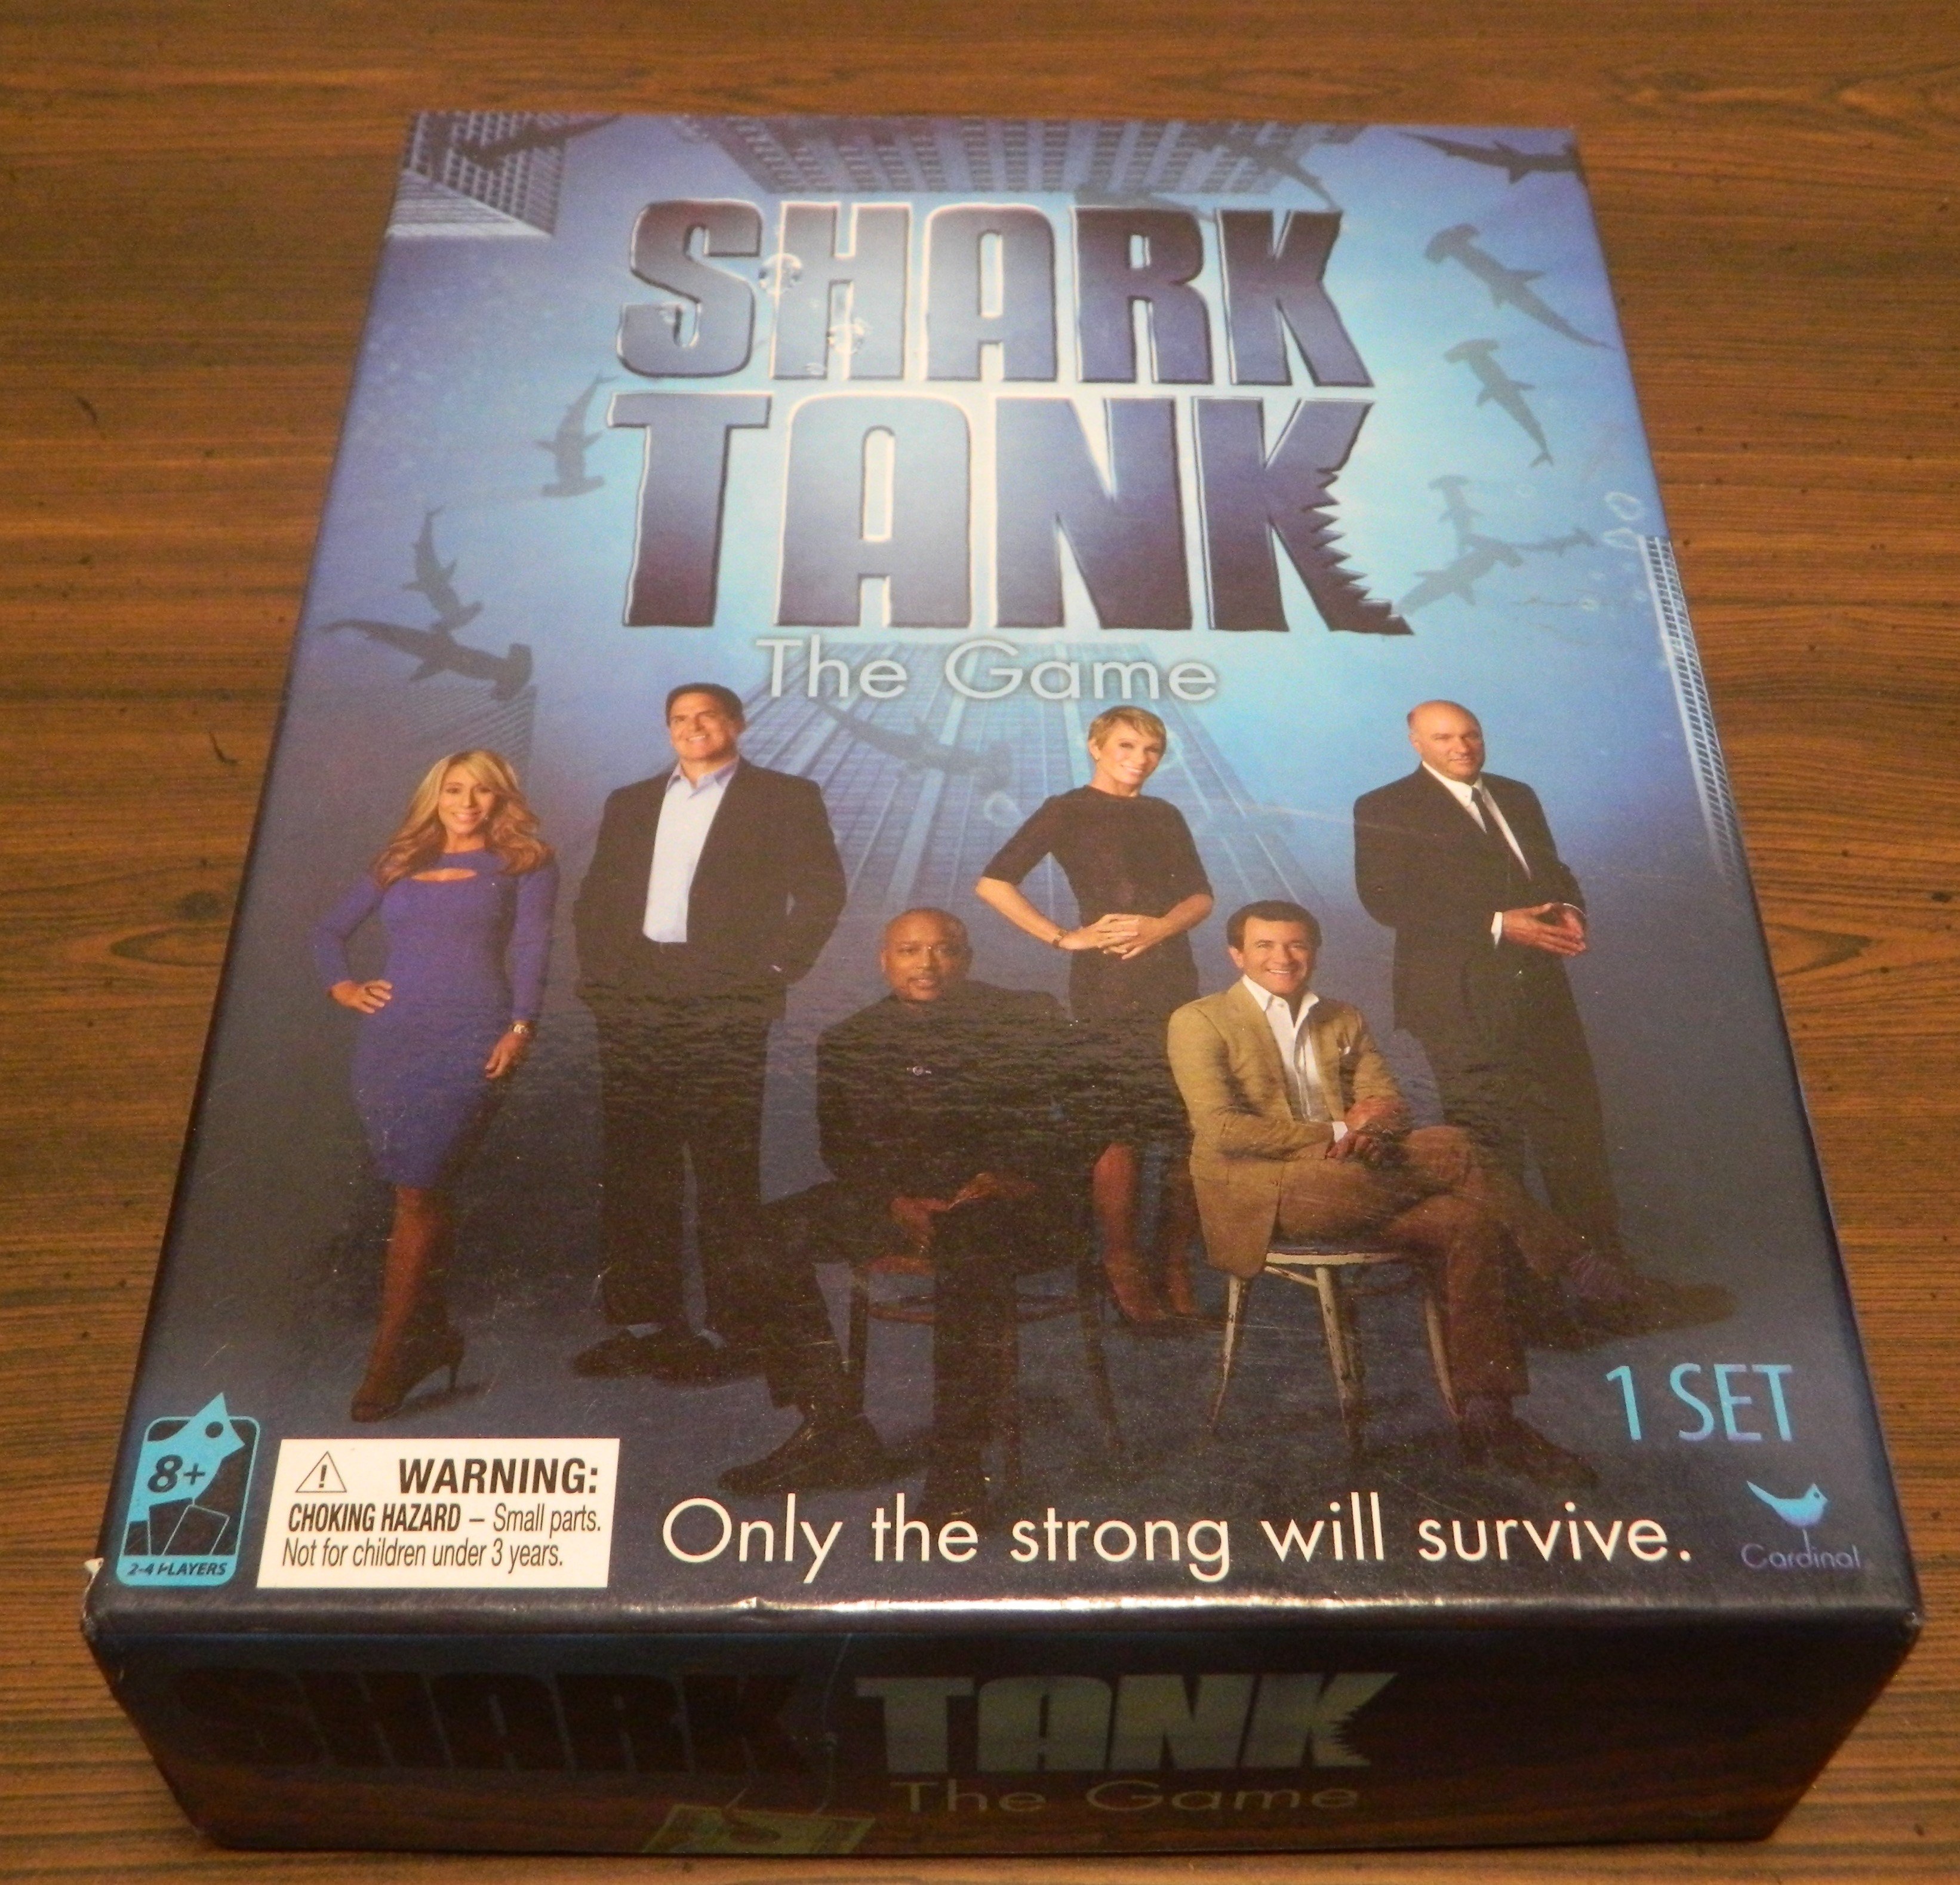 Shark Tank The Game Board Game Review and Rules